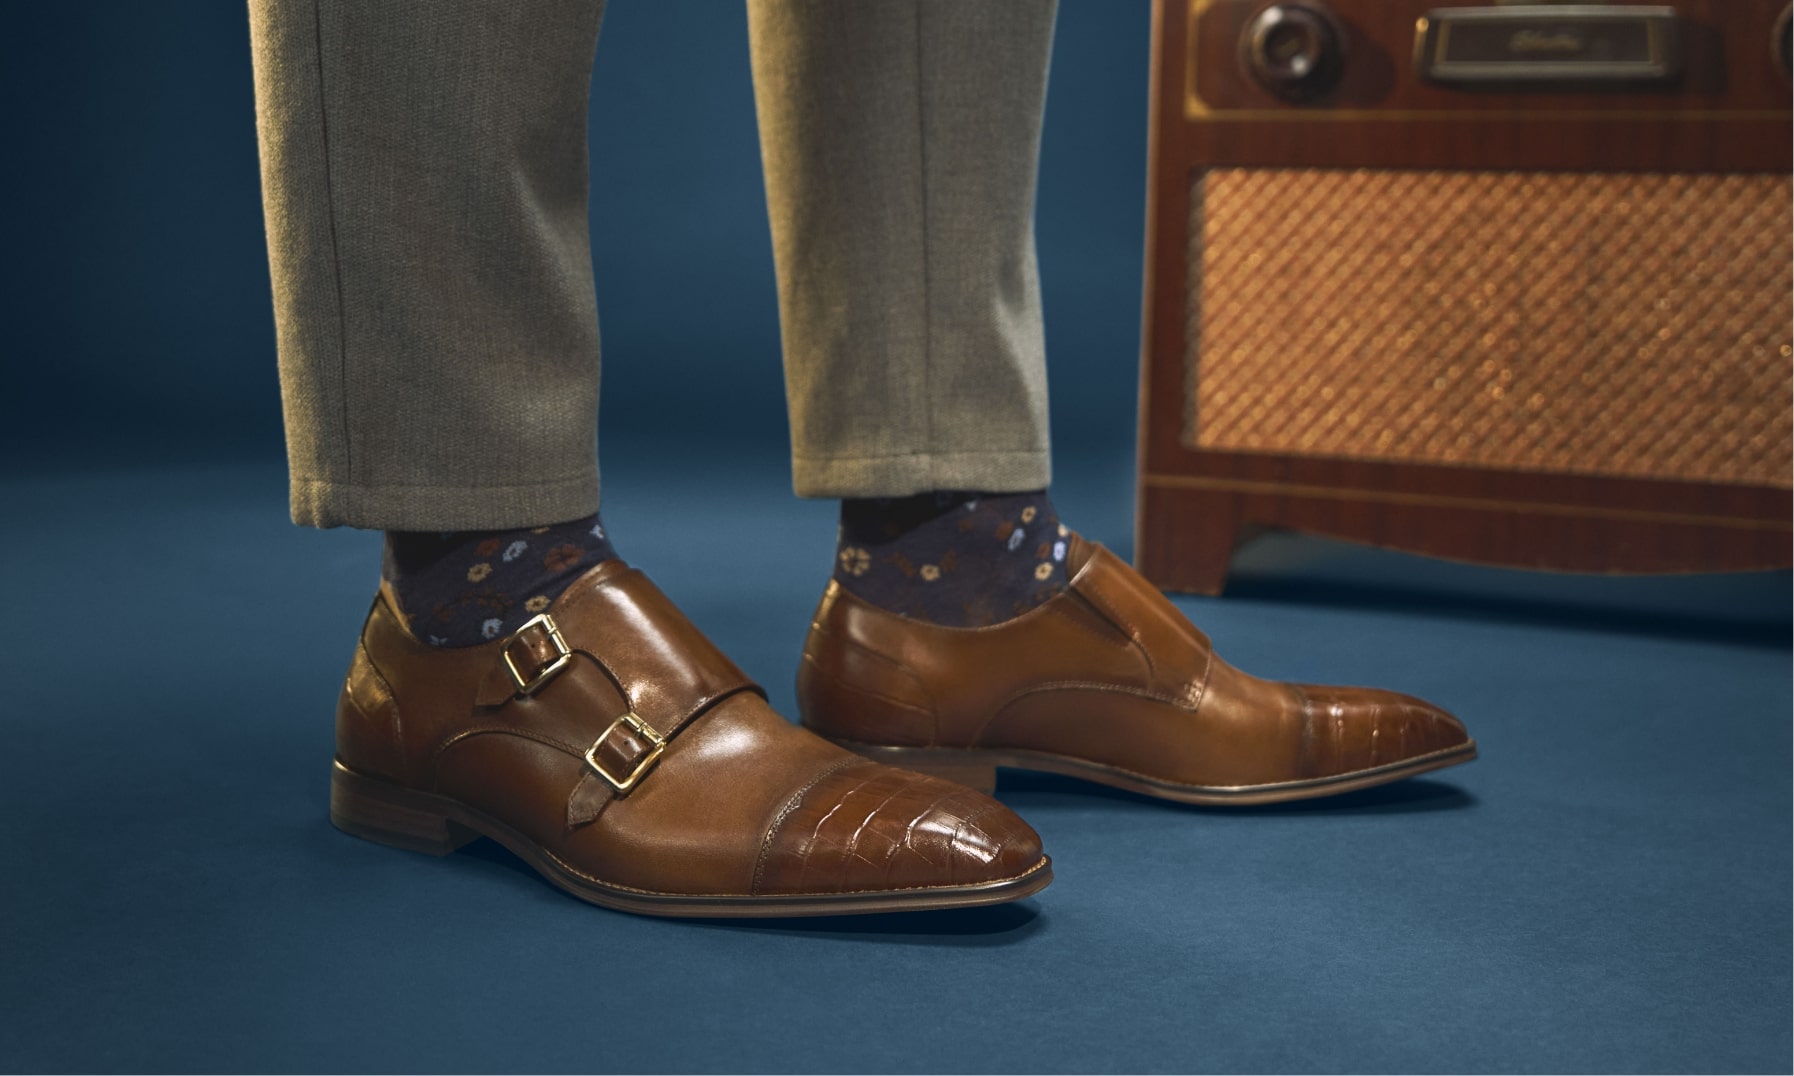 Click to shop Stacy Adams dress shoes. Image features the Pierson in cognac.